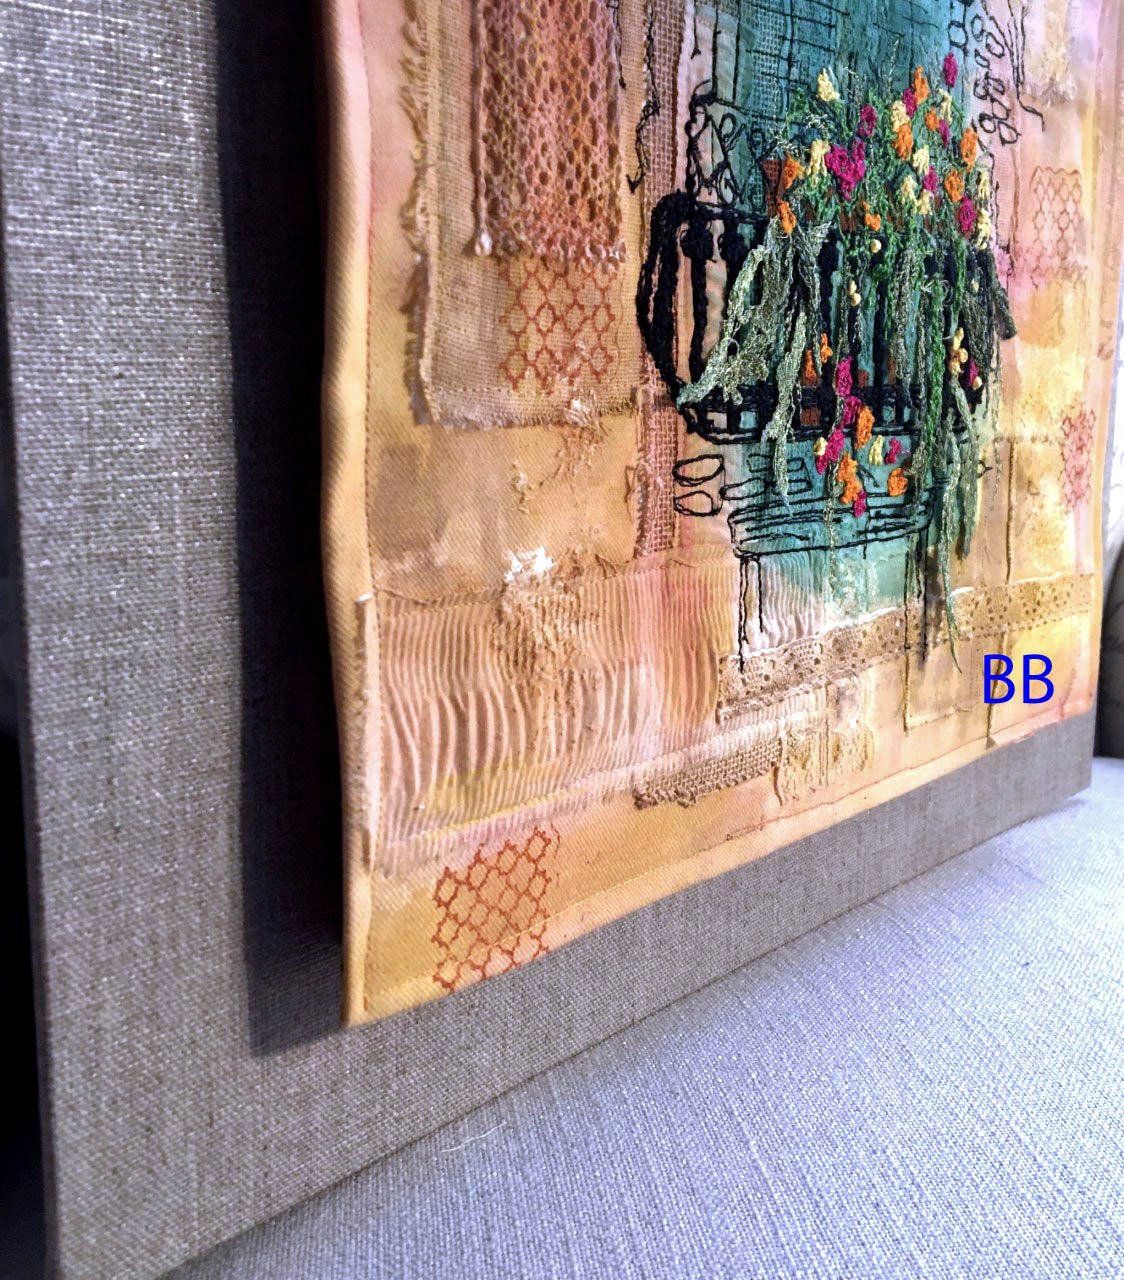 A GLIMPSE OF VENICE, painted pieced surface, worked by machine and some hand stitching. The foliage is worked on soluble fabric and attached when dissolved to give a 3 D effect.